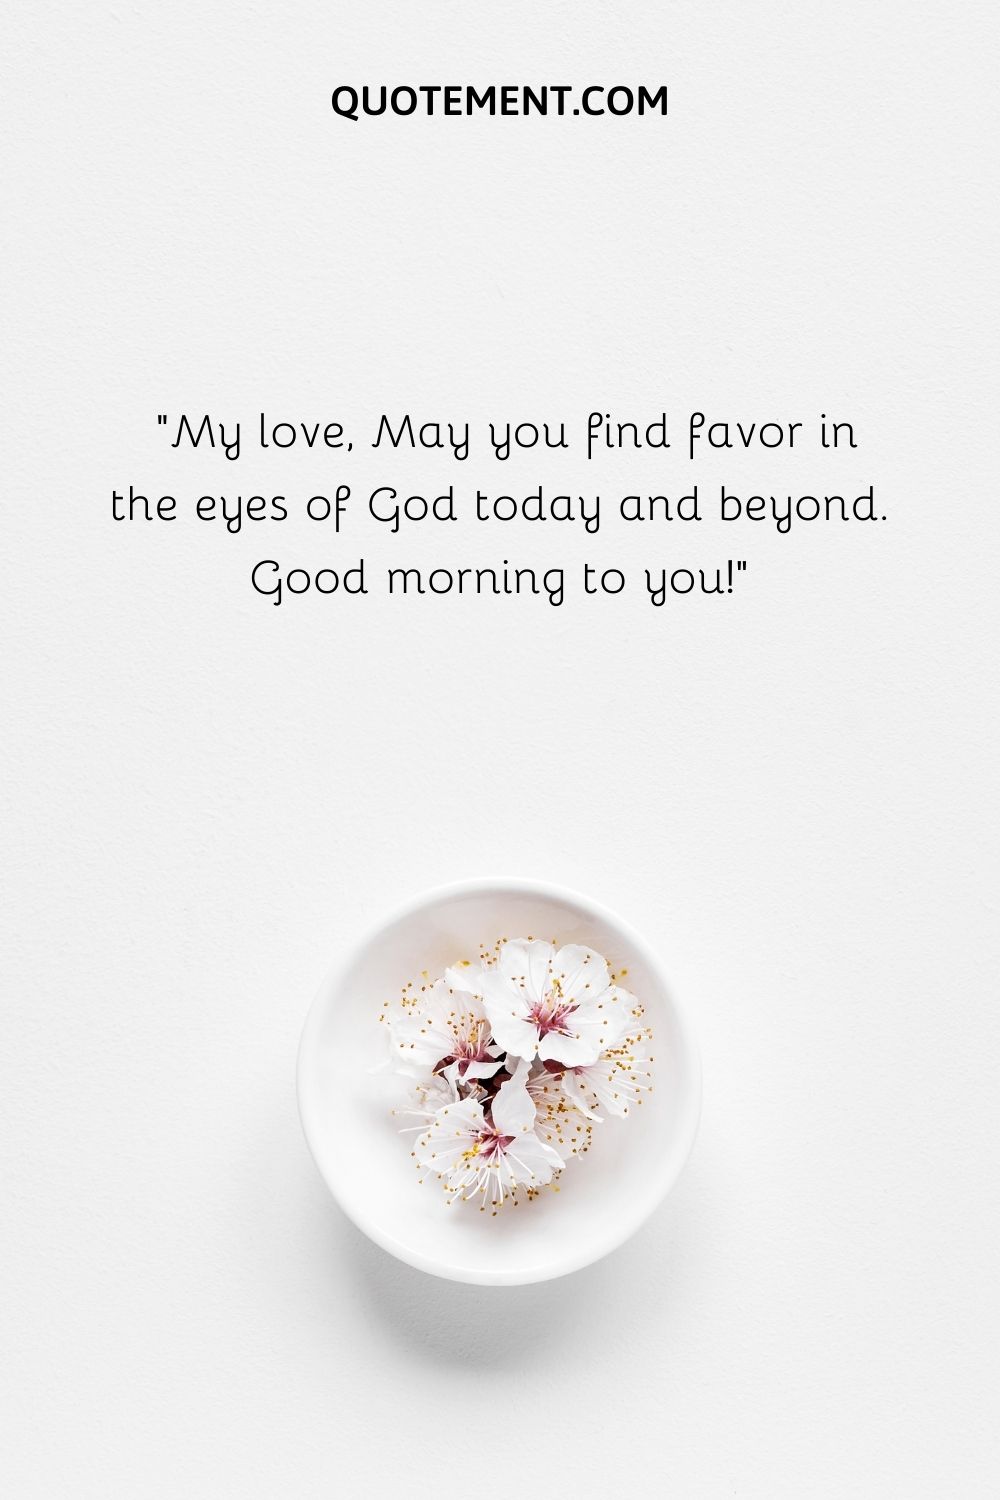 My love, May you find favor in the eyes of God today and beyond